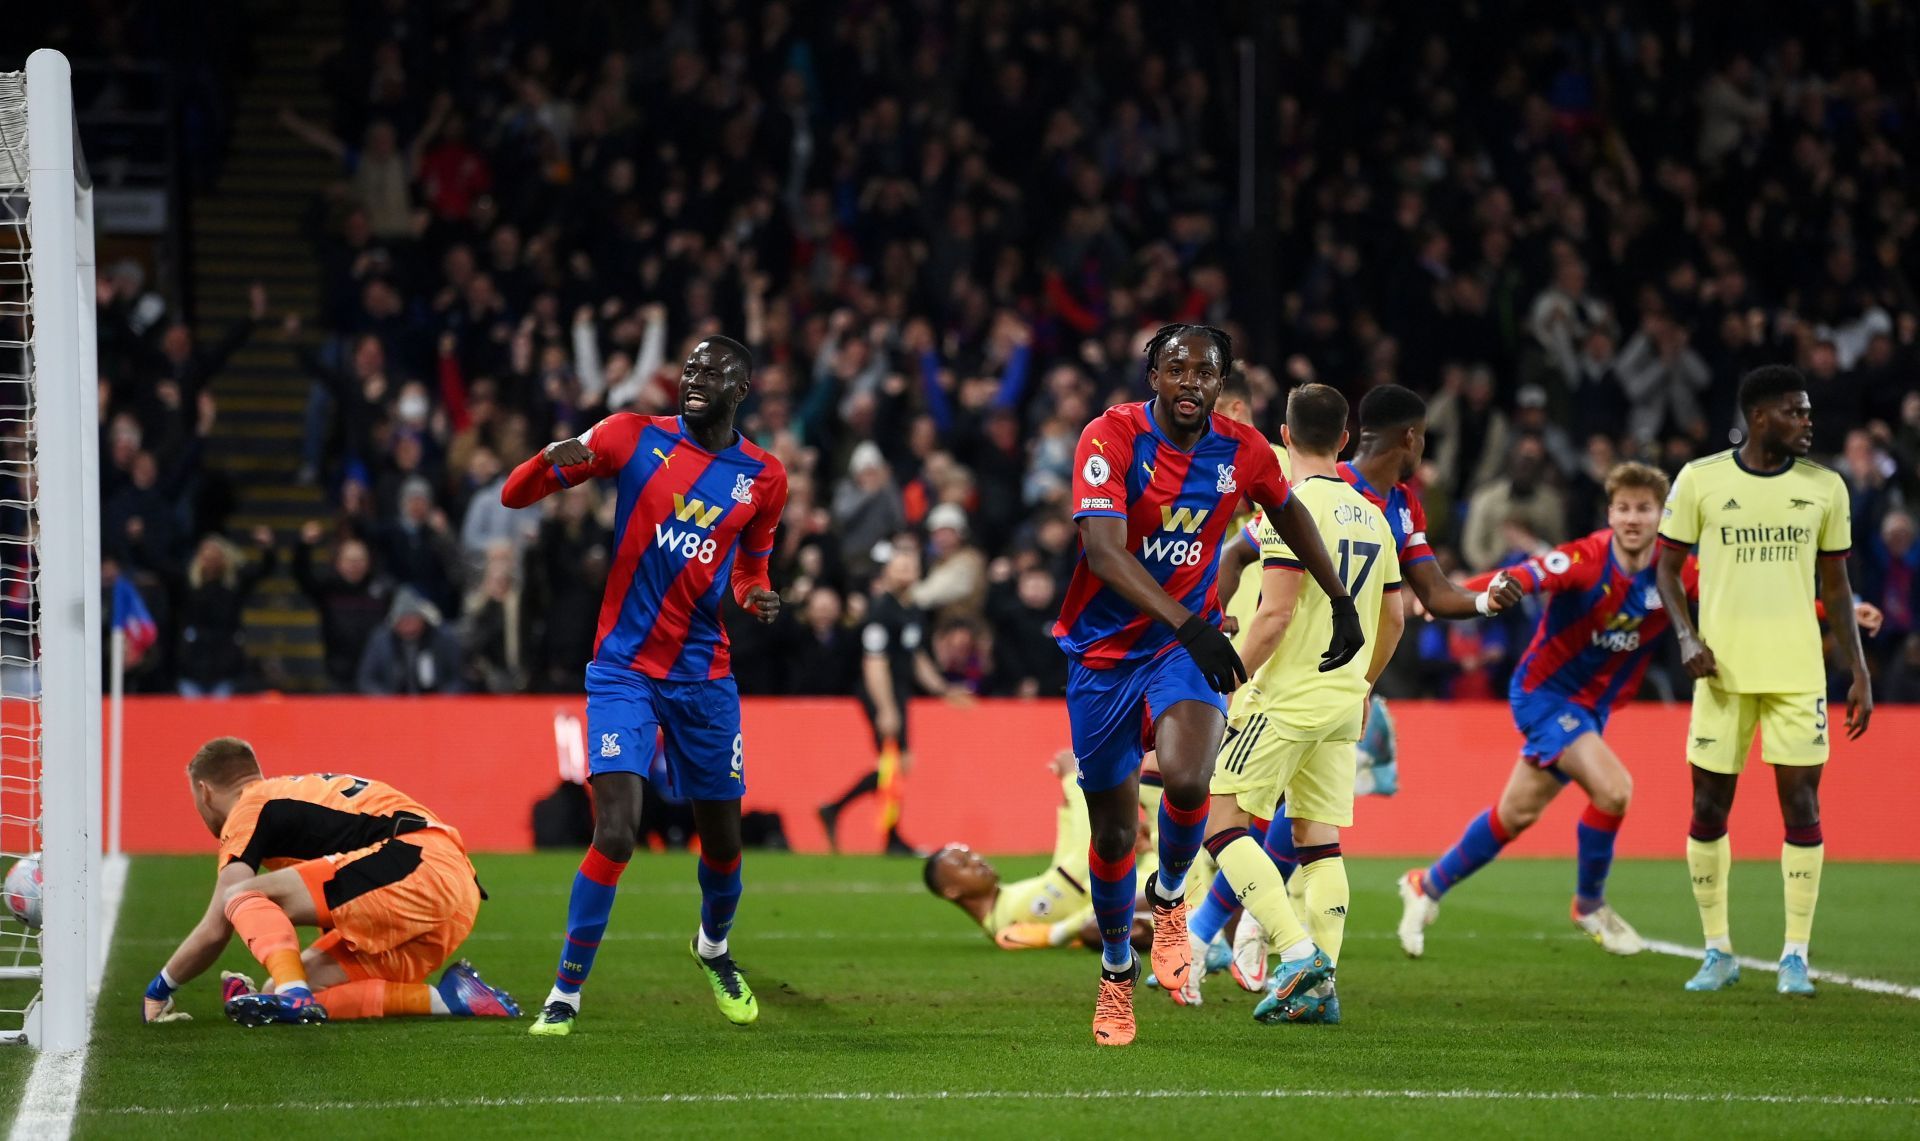 Crystal Palace secured a thumping 3-0 victory over Arsenal in the Premier League